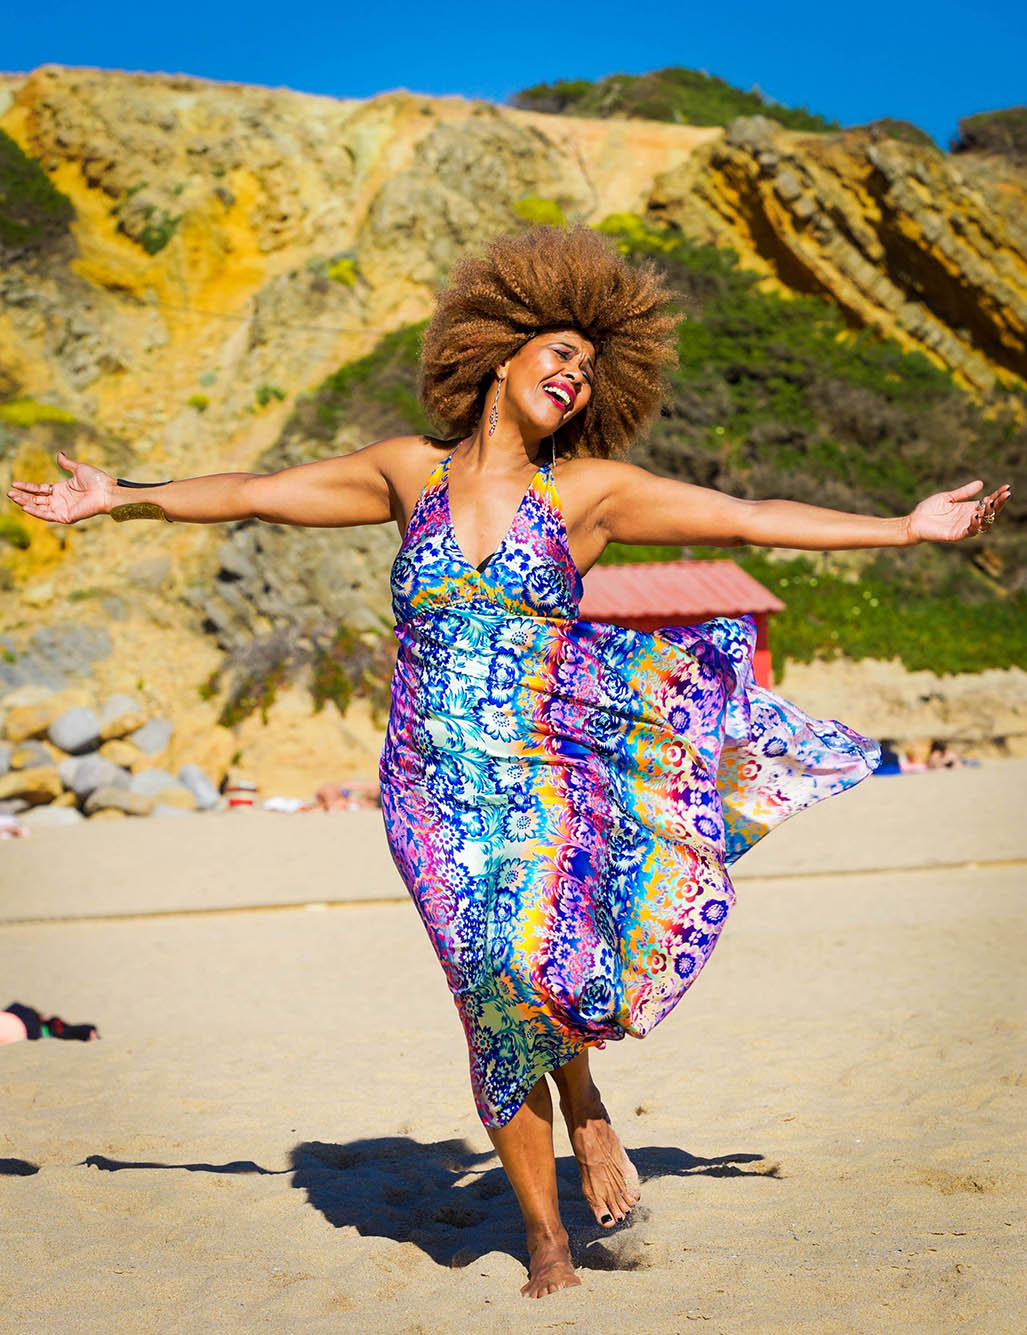 Photo: a Cape Verdean woman with tan skin and large, dark blonde afro poses with arms outstretched. She wears a rainbow dresses that flows behind her as she poses on a scenic beach.